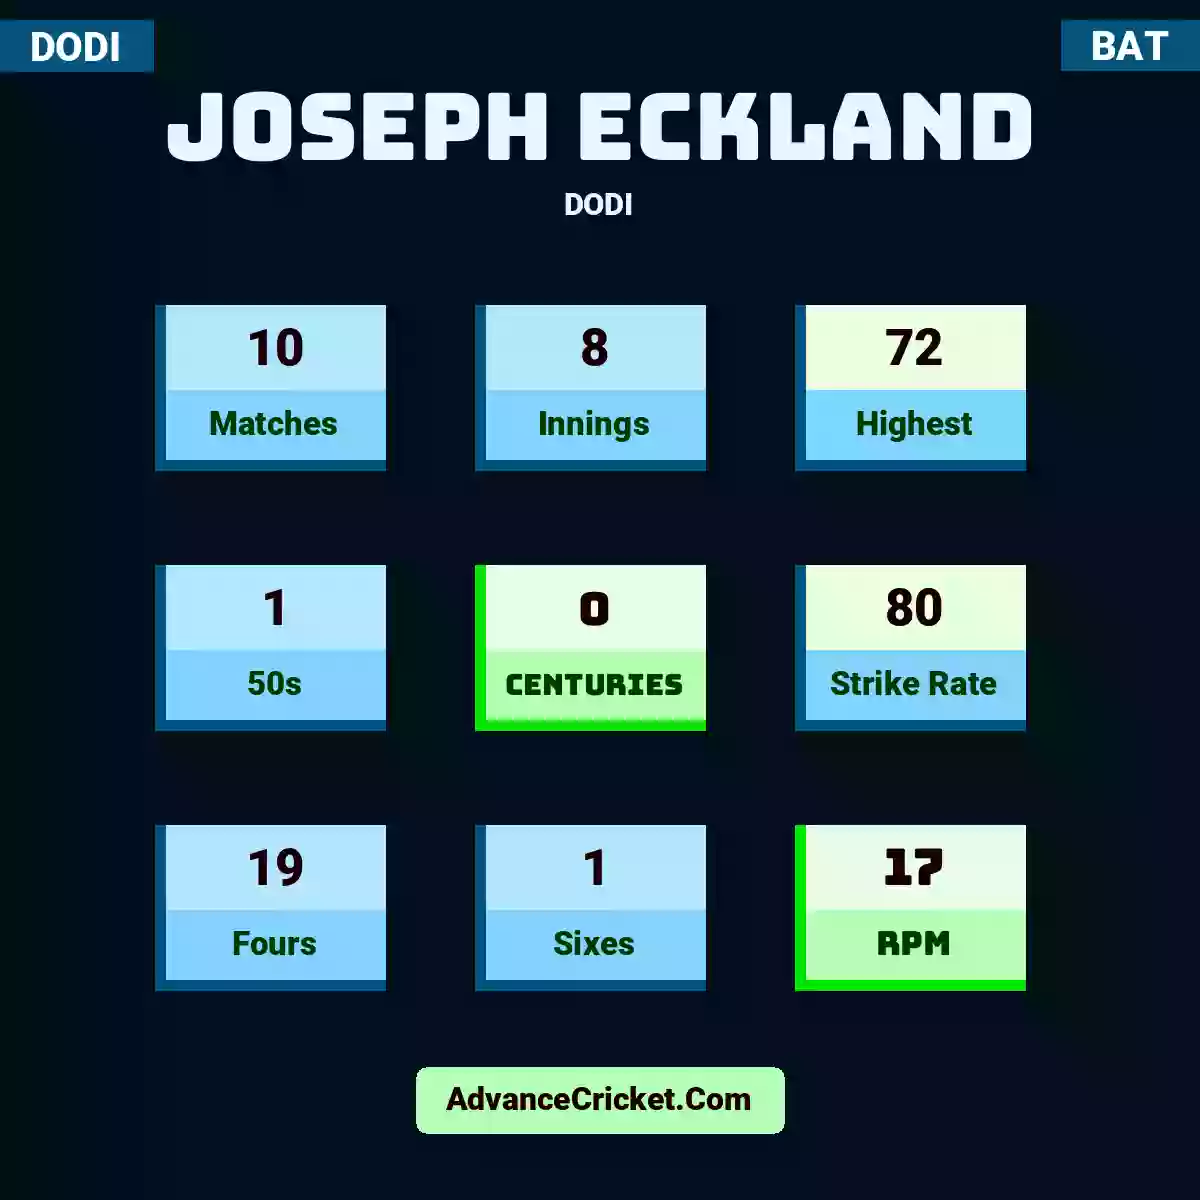 Joseph Eckland DODI , Joseph Eckland played 10 matches, scored 72 runs as highest, 1 half-centuries, and 0 centuries, with a strike rate of 80. J.Eckland hit 19 fours and 1 sixes, with an RPM of 17.